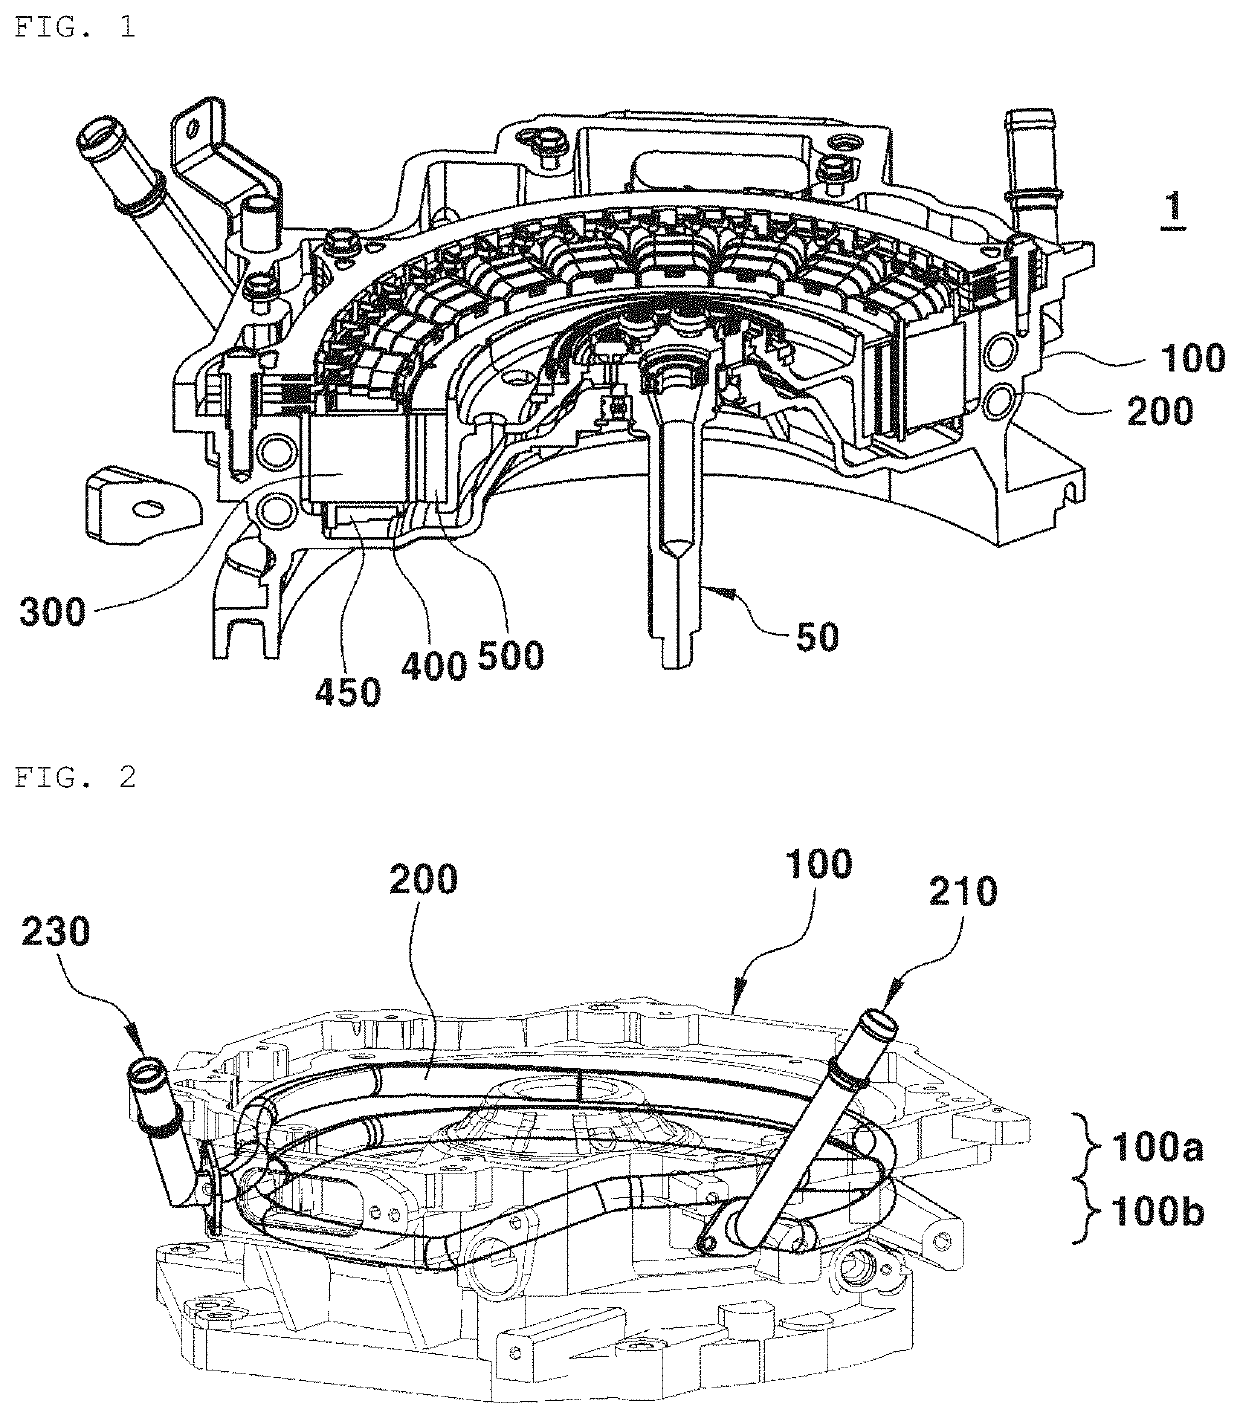 Motor housing with an integrated cooling passage